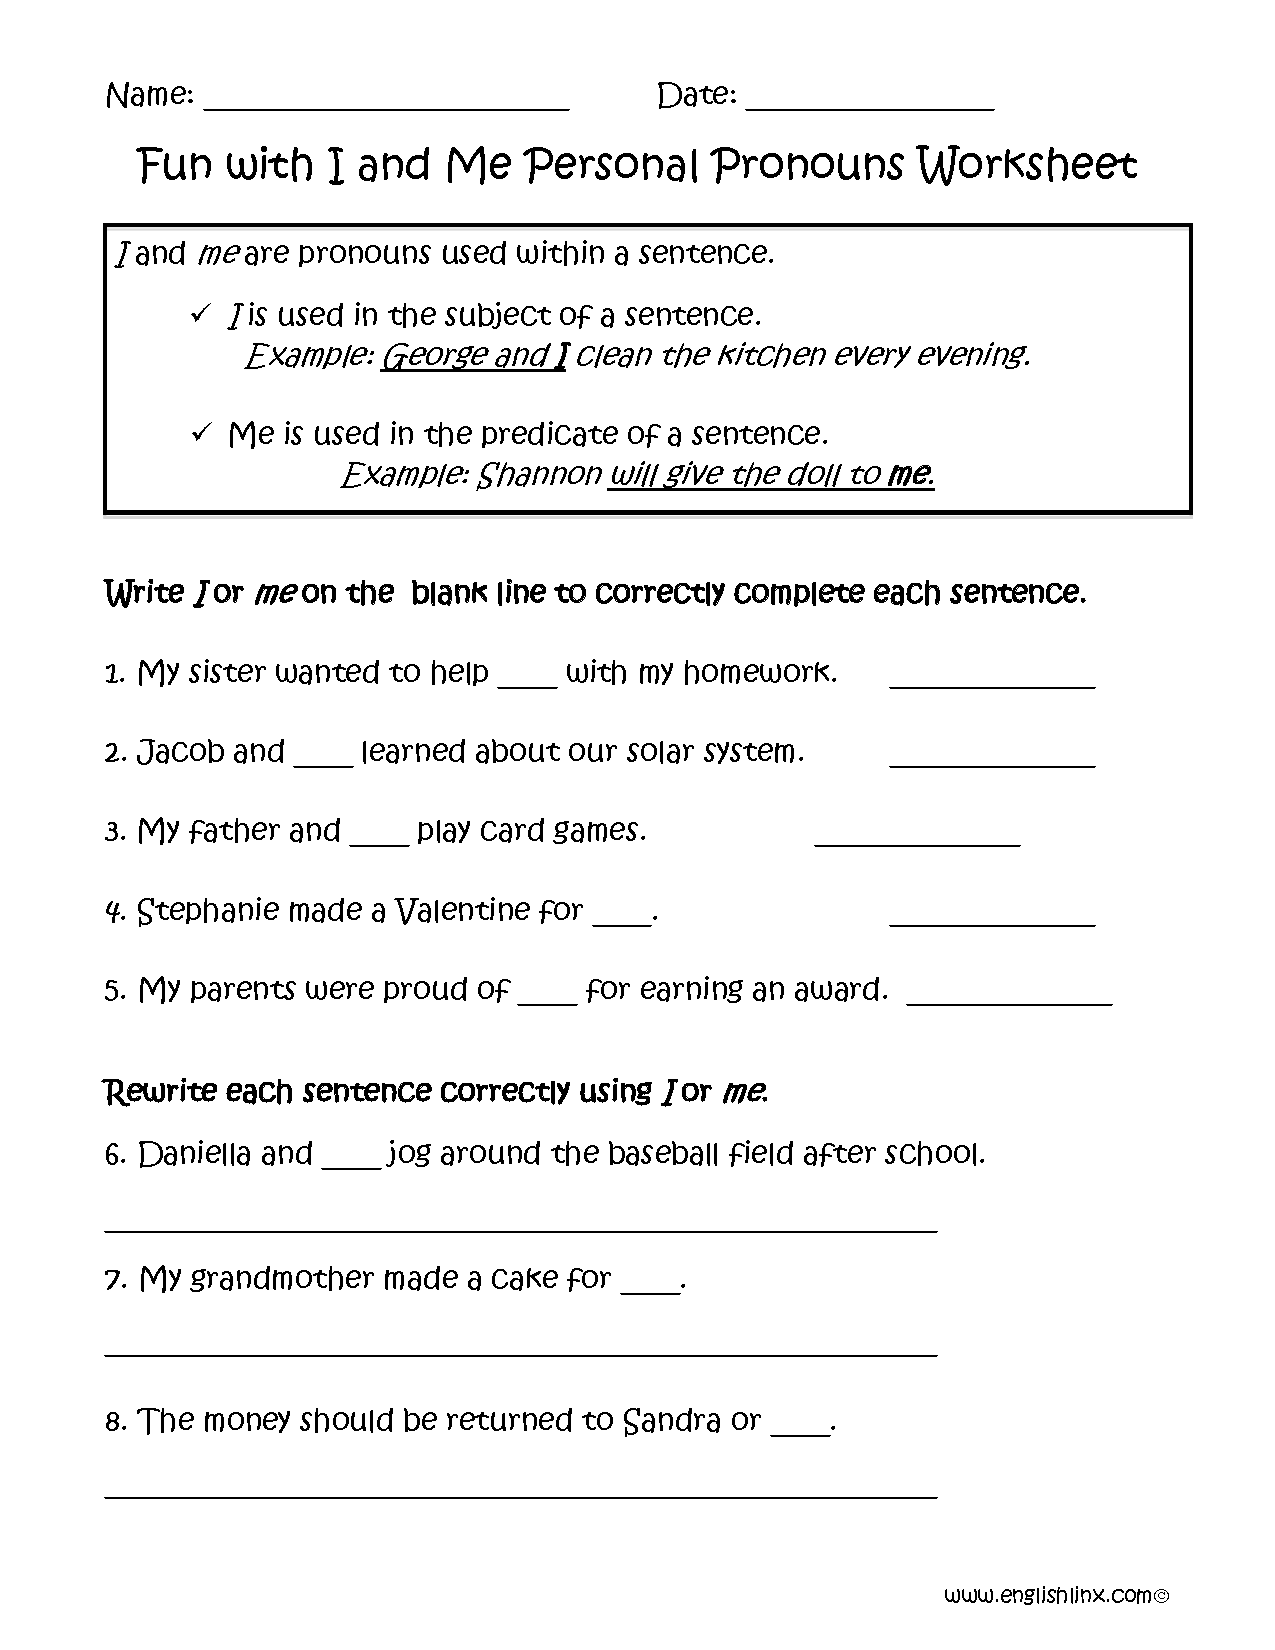 personal-pronouns-worksheets-fun-with-i-or-me-personal-pronouns-worksheets